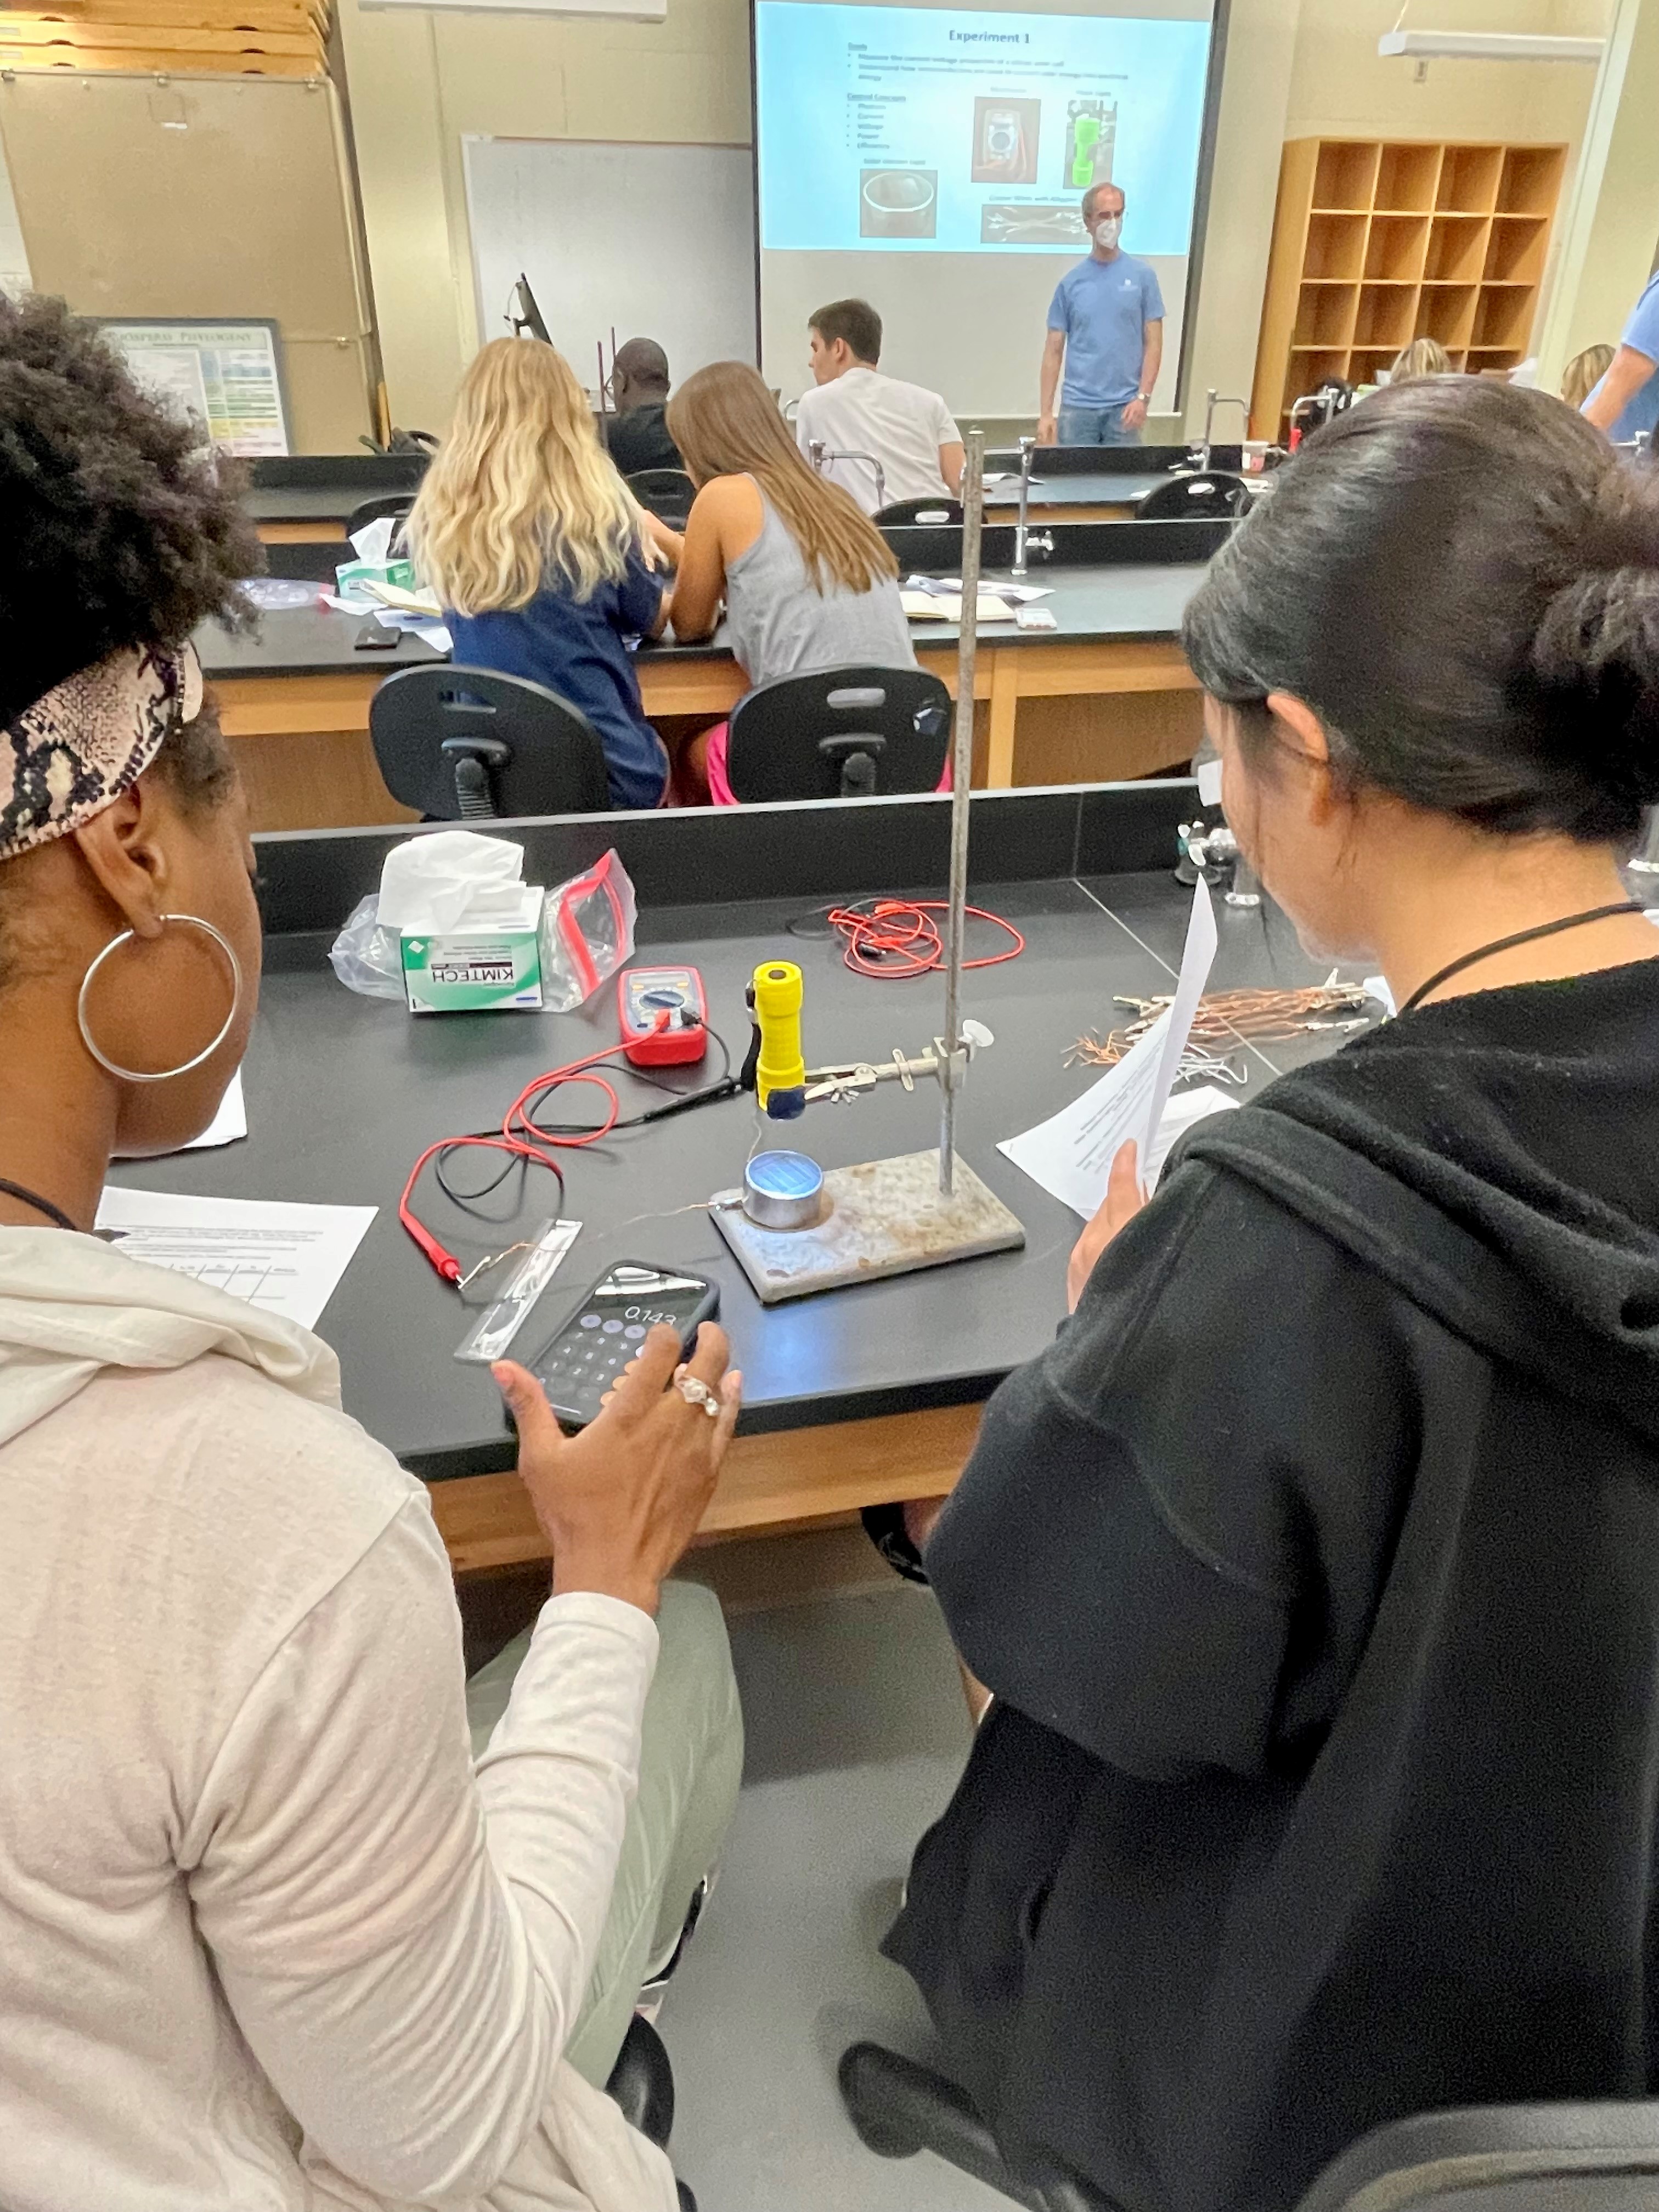 Summer Science Institute students Serenity Griffin and Dani Kim work together to measure current-voltage properties of a silicon solar cell to understand how semiconductors are used to convert solar energy into electrical energy.